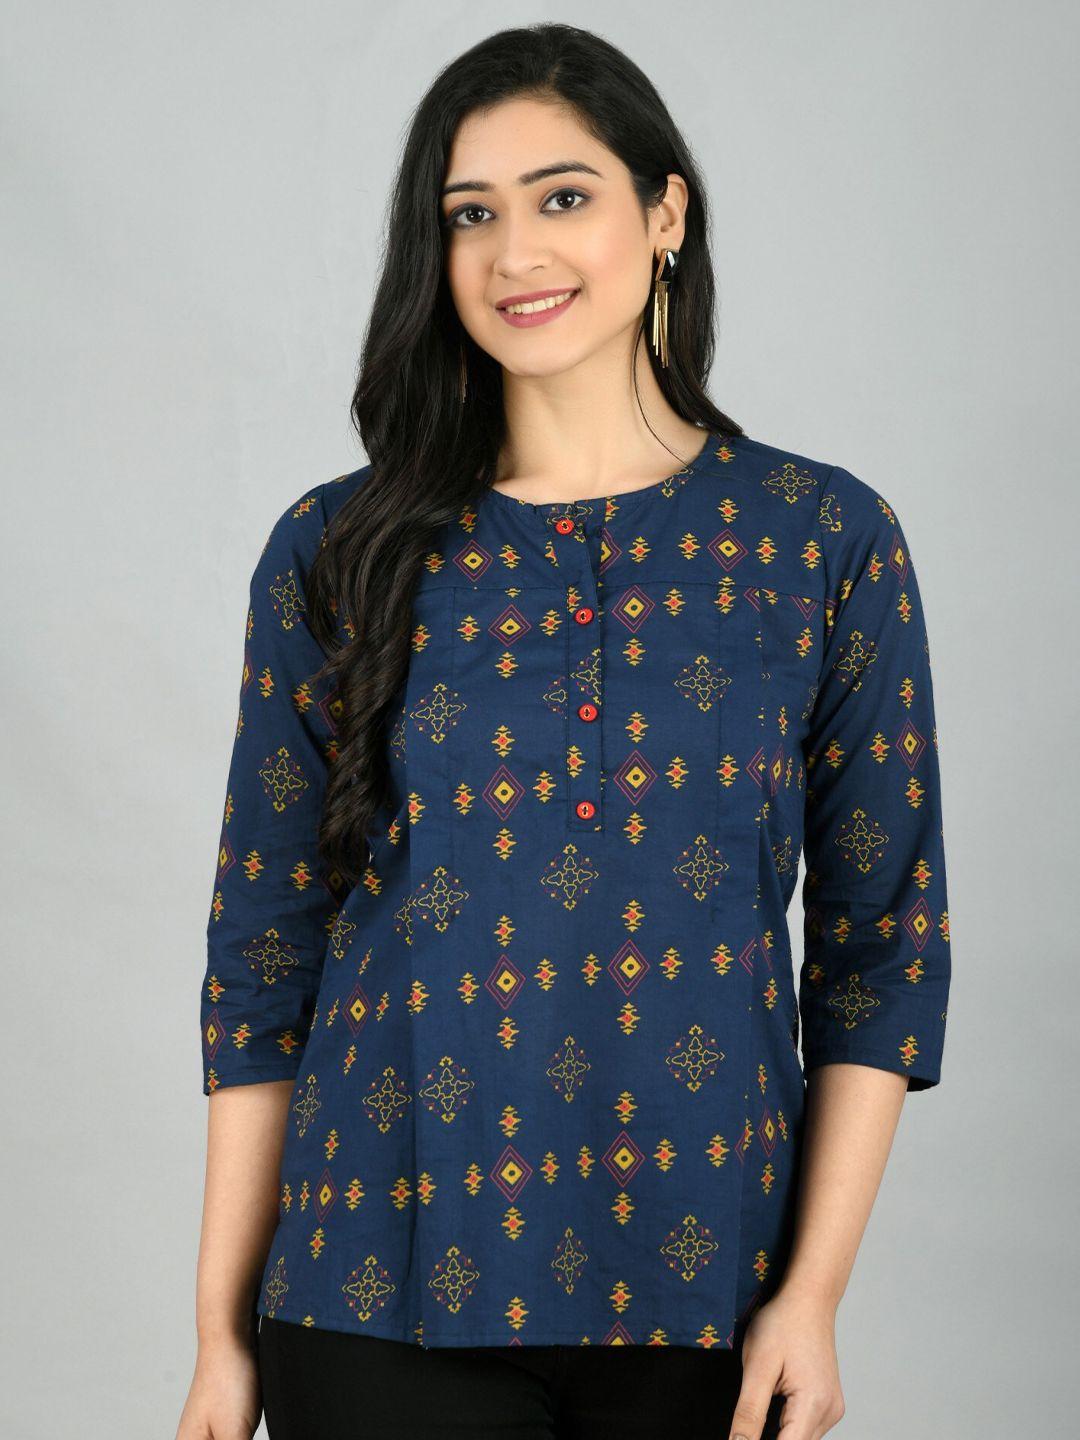 moshe ethnic motifs printed a-line top